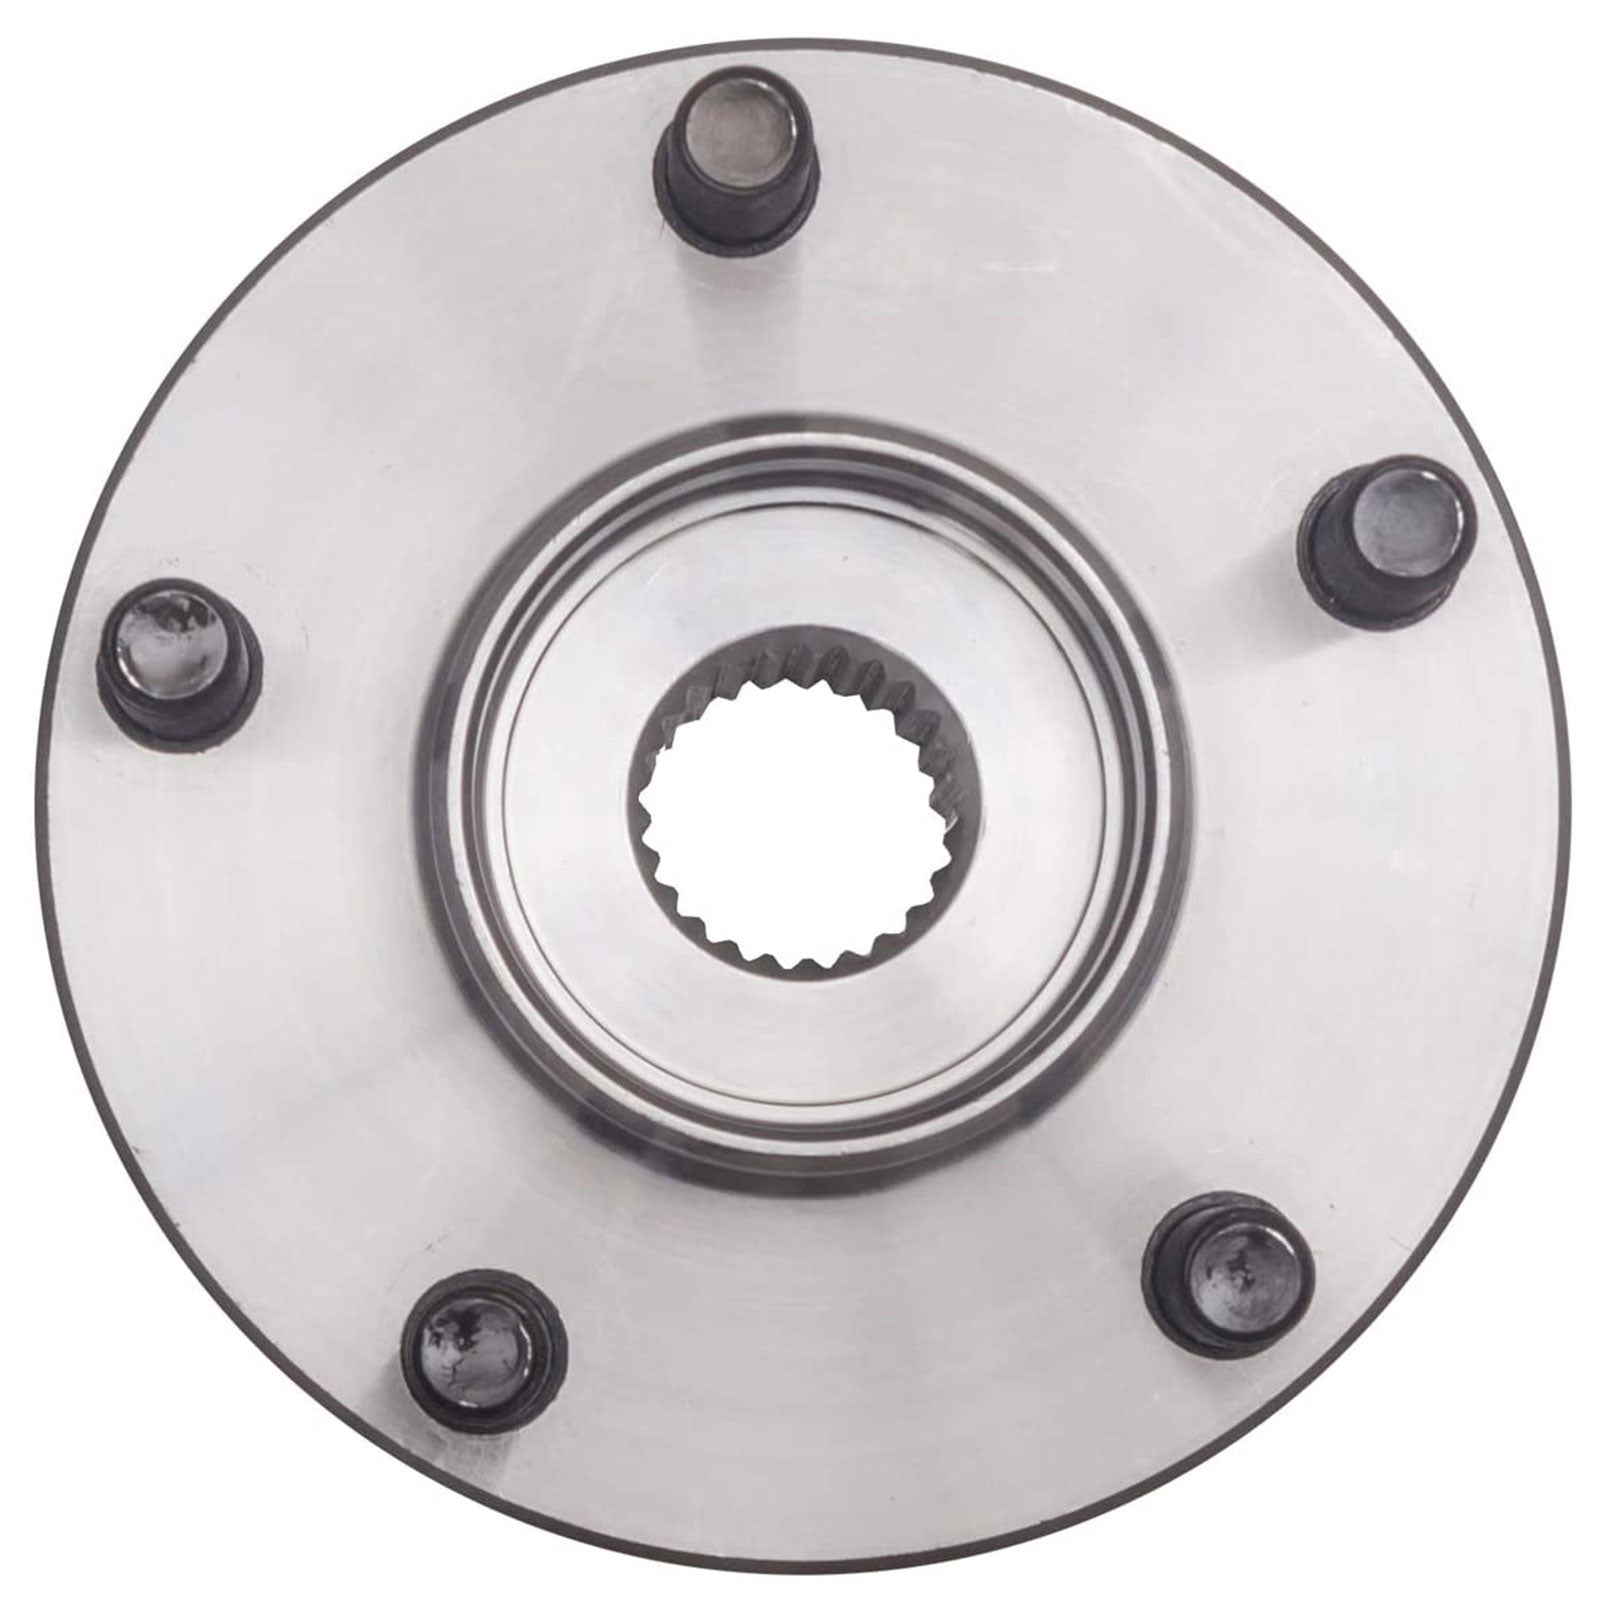 MotorbyMotor 518519 Front Wheel Bearing Hub Assembly with 5 Lugs Ford Transit Connect Low-Runout OE Directly Replace Hub Bearing MotorbyMotor